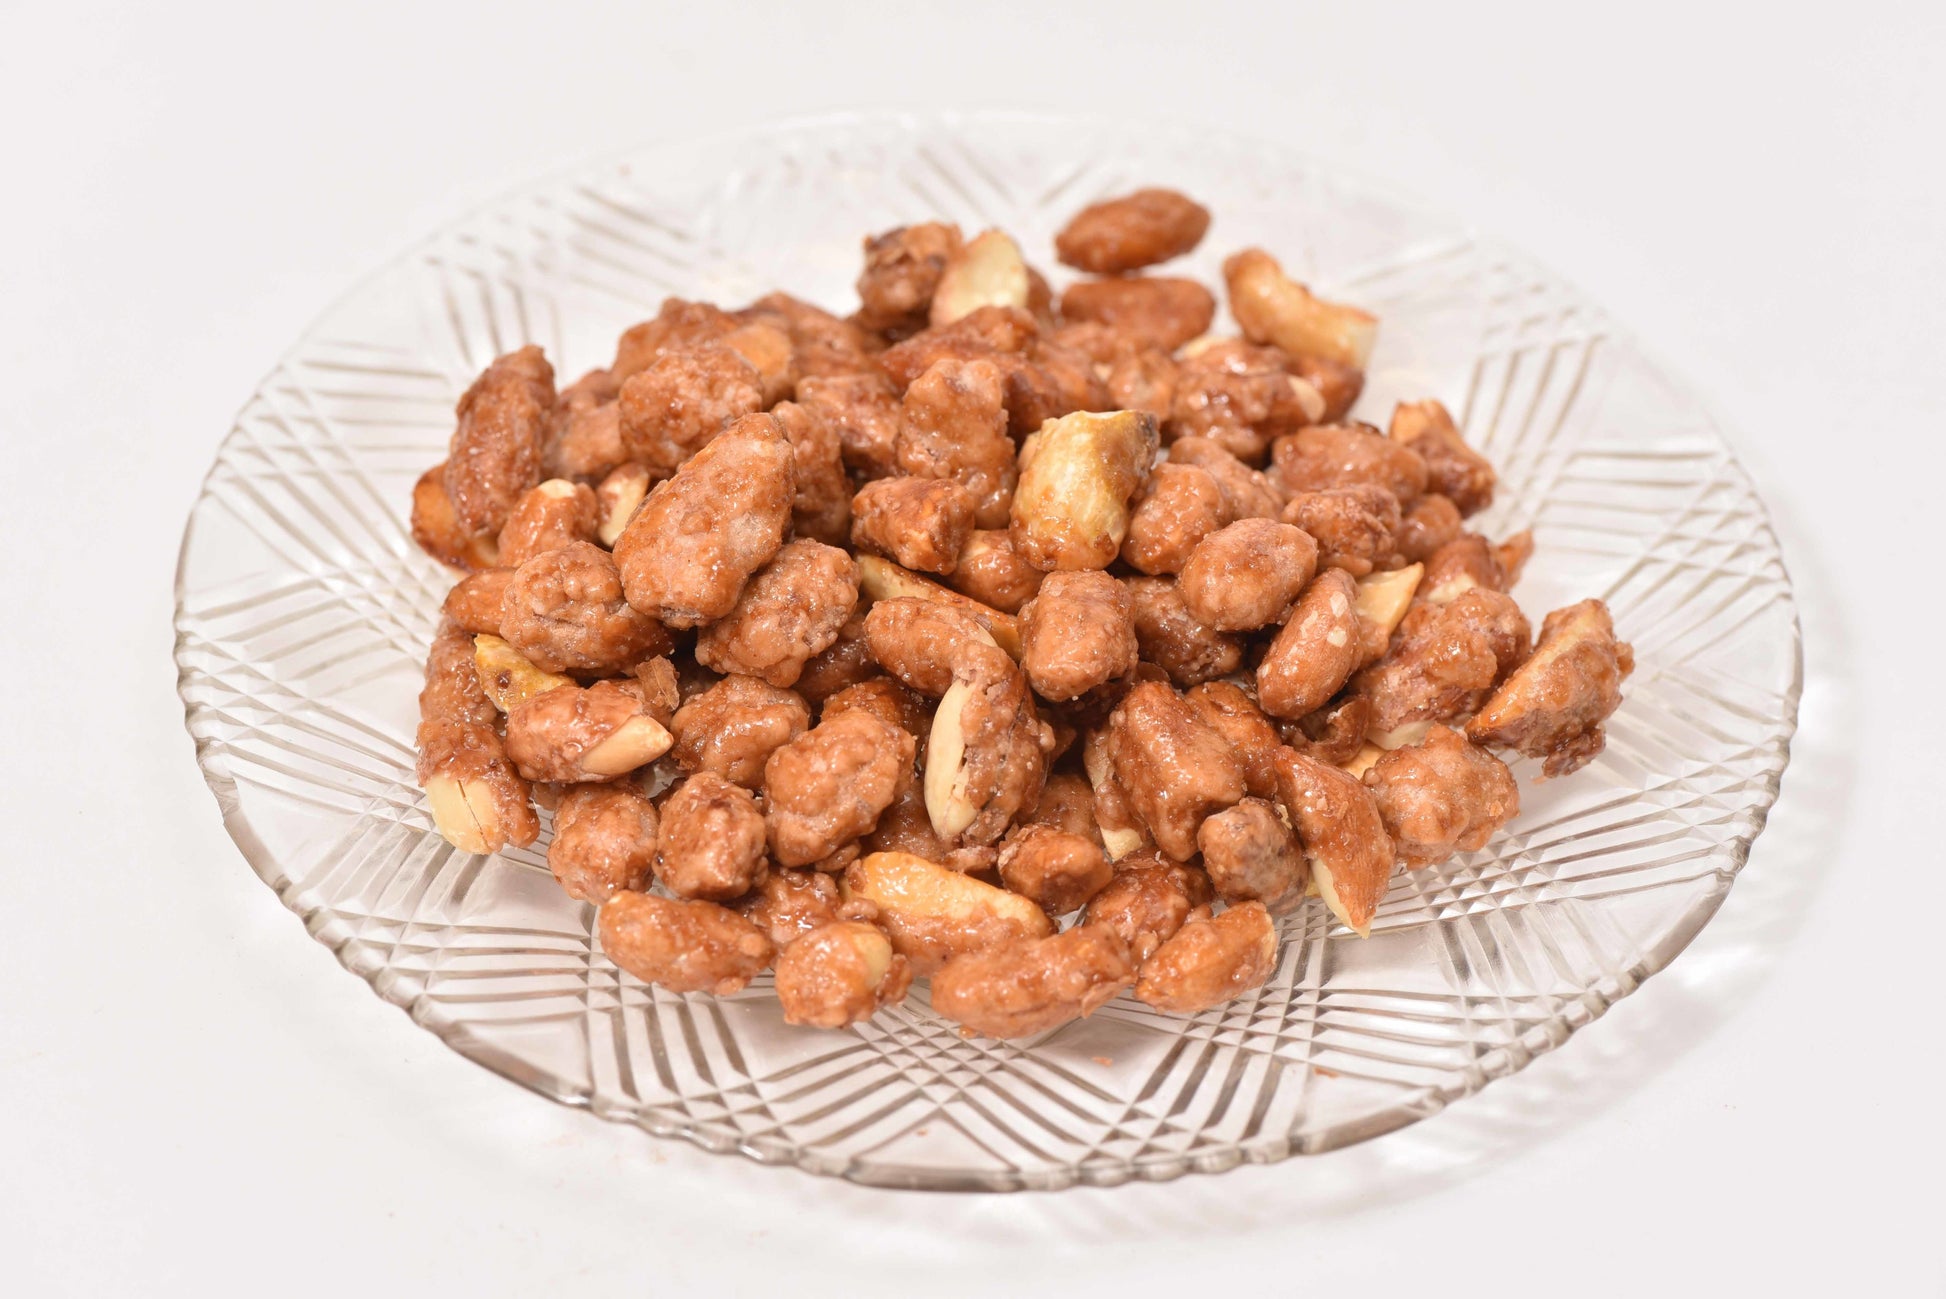 8 oz Bag of Butter Toasted Peanuts - Conrad's Confectionery